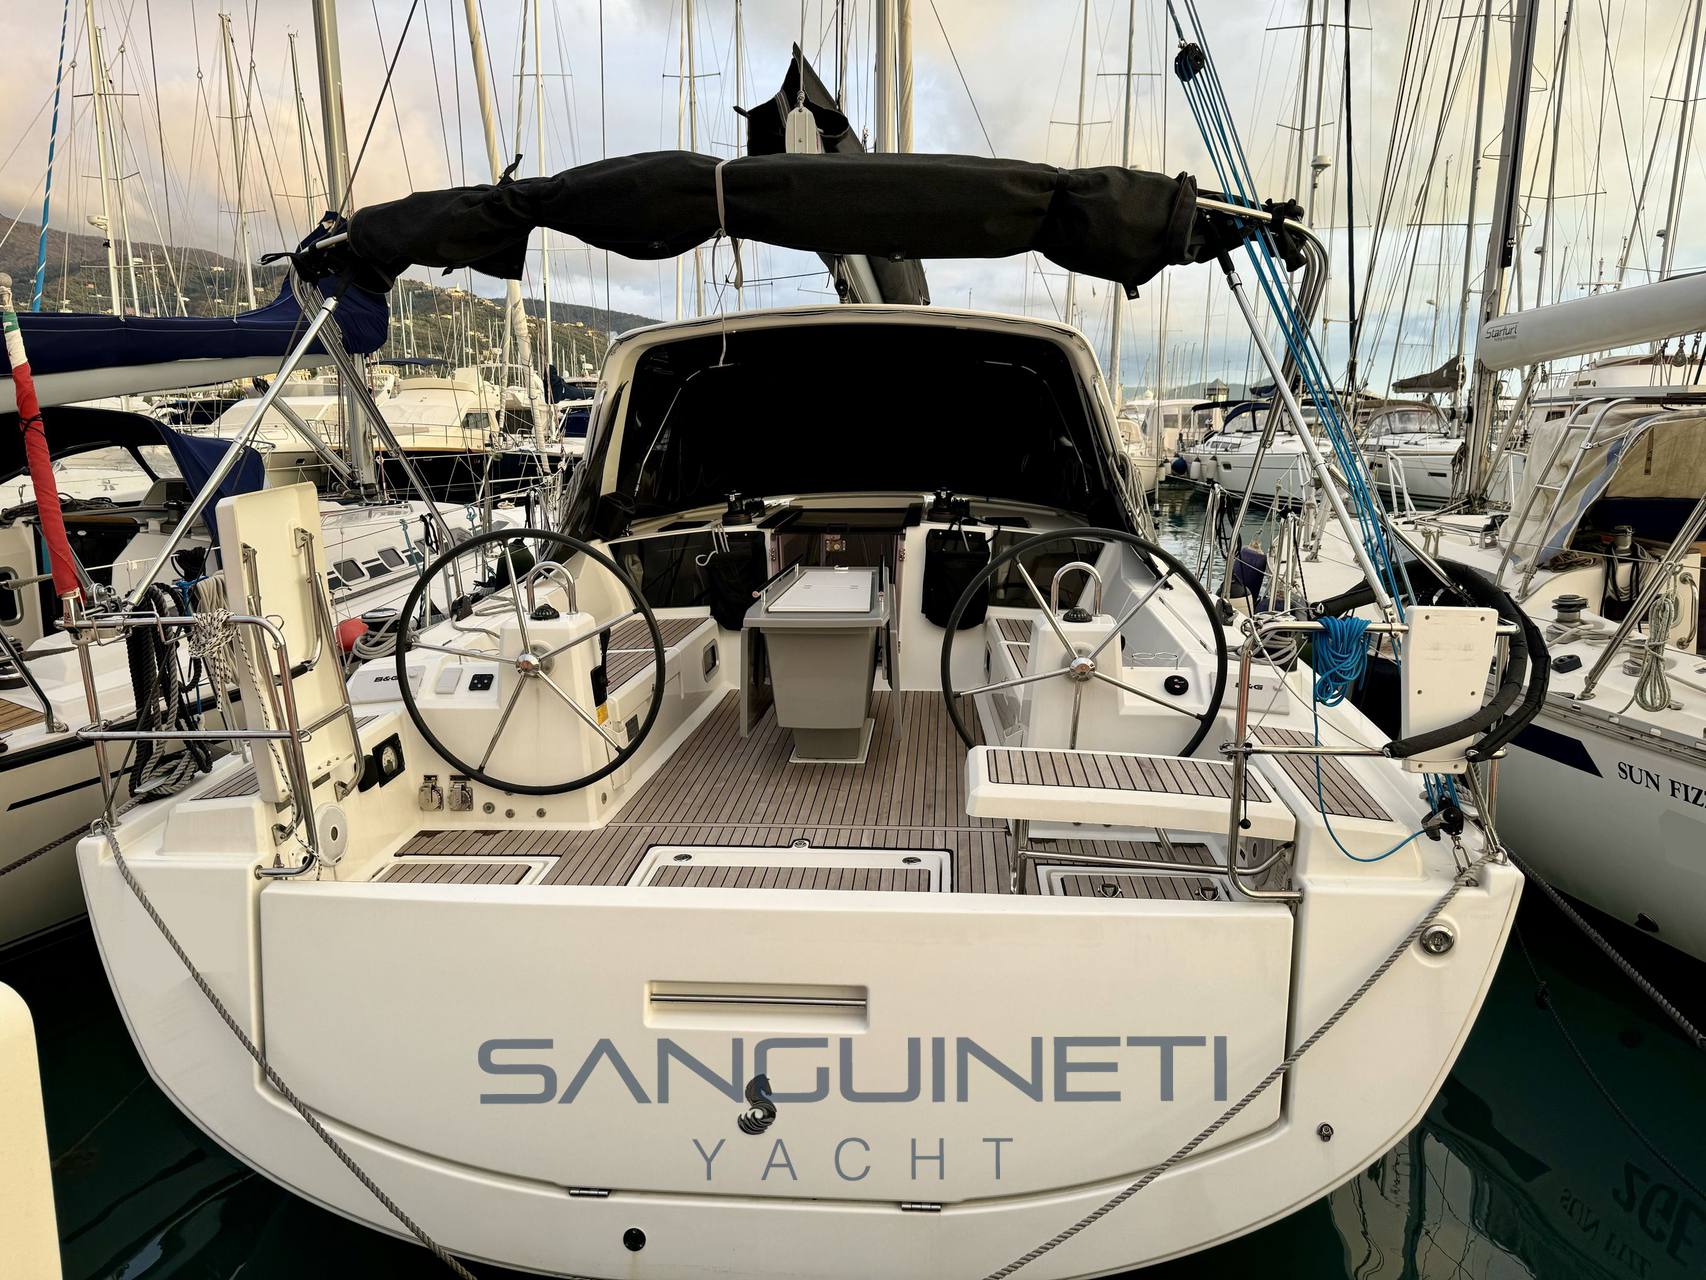 Beneteau Oceanis 41.1 Sailing boat used for sale